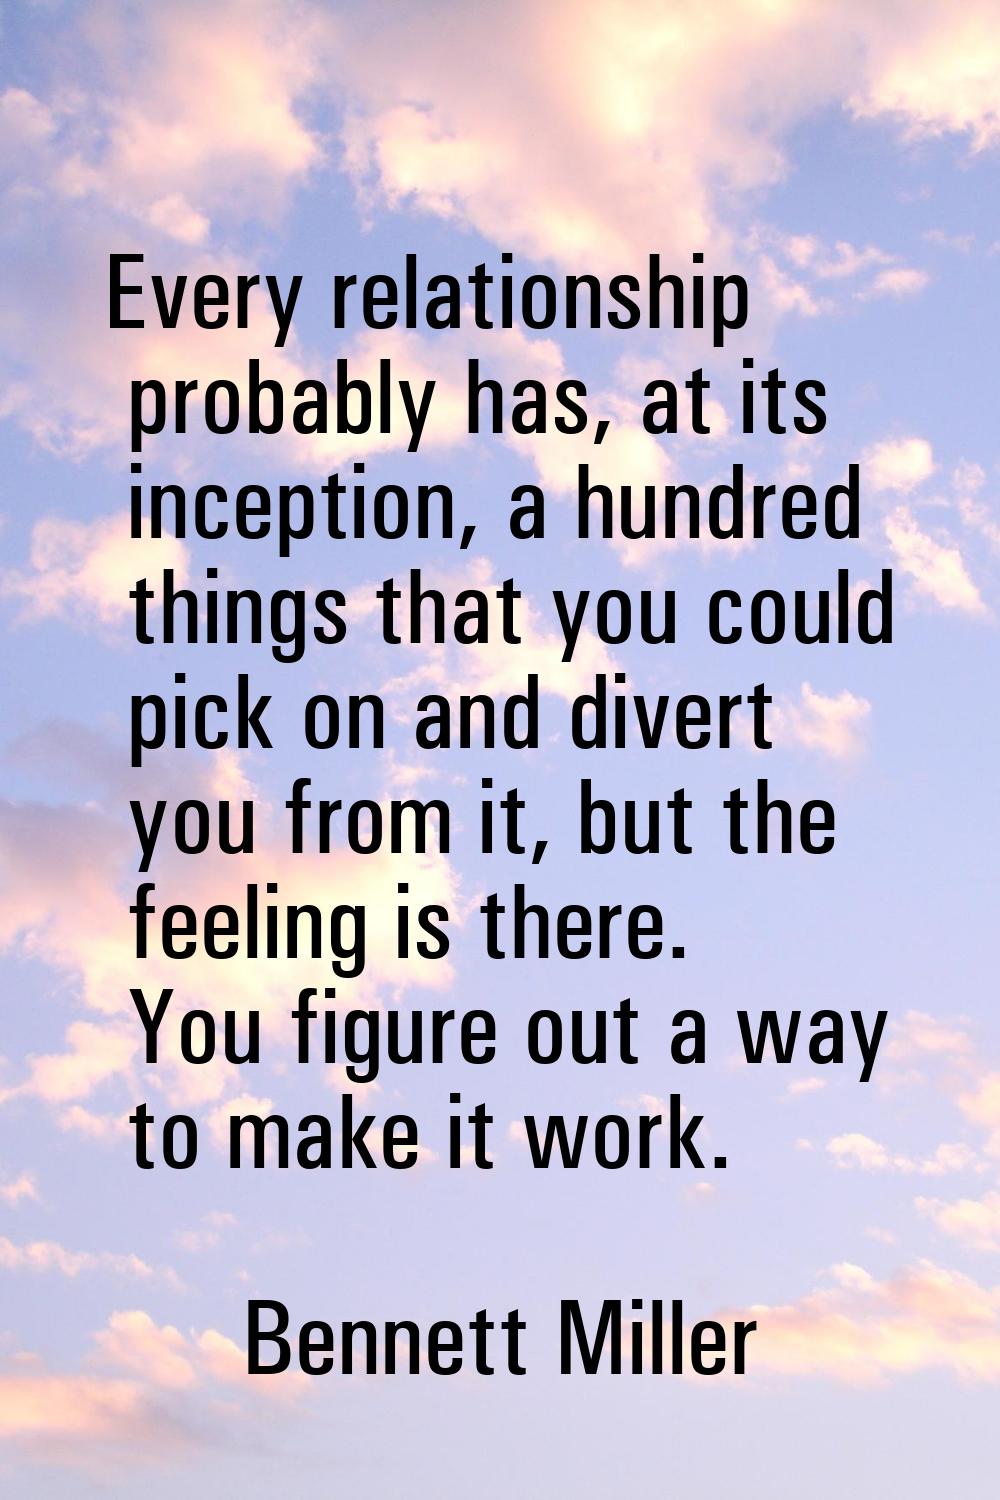 Every relationship probably has, at its inception, a hundred things that you could pick on and dive